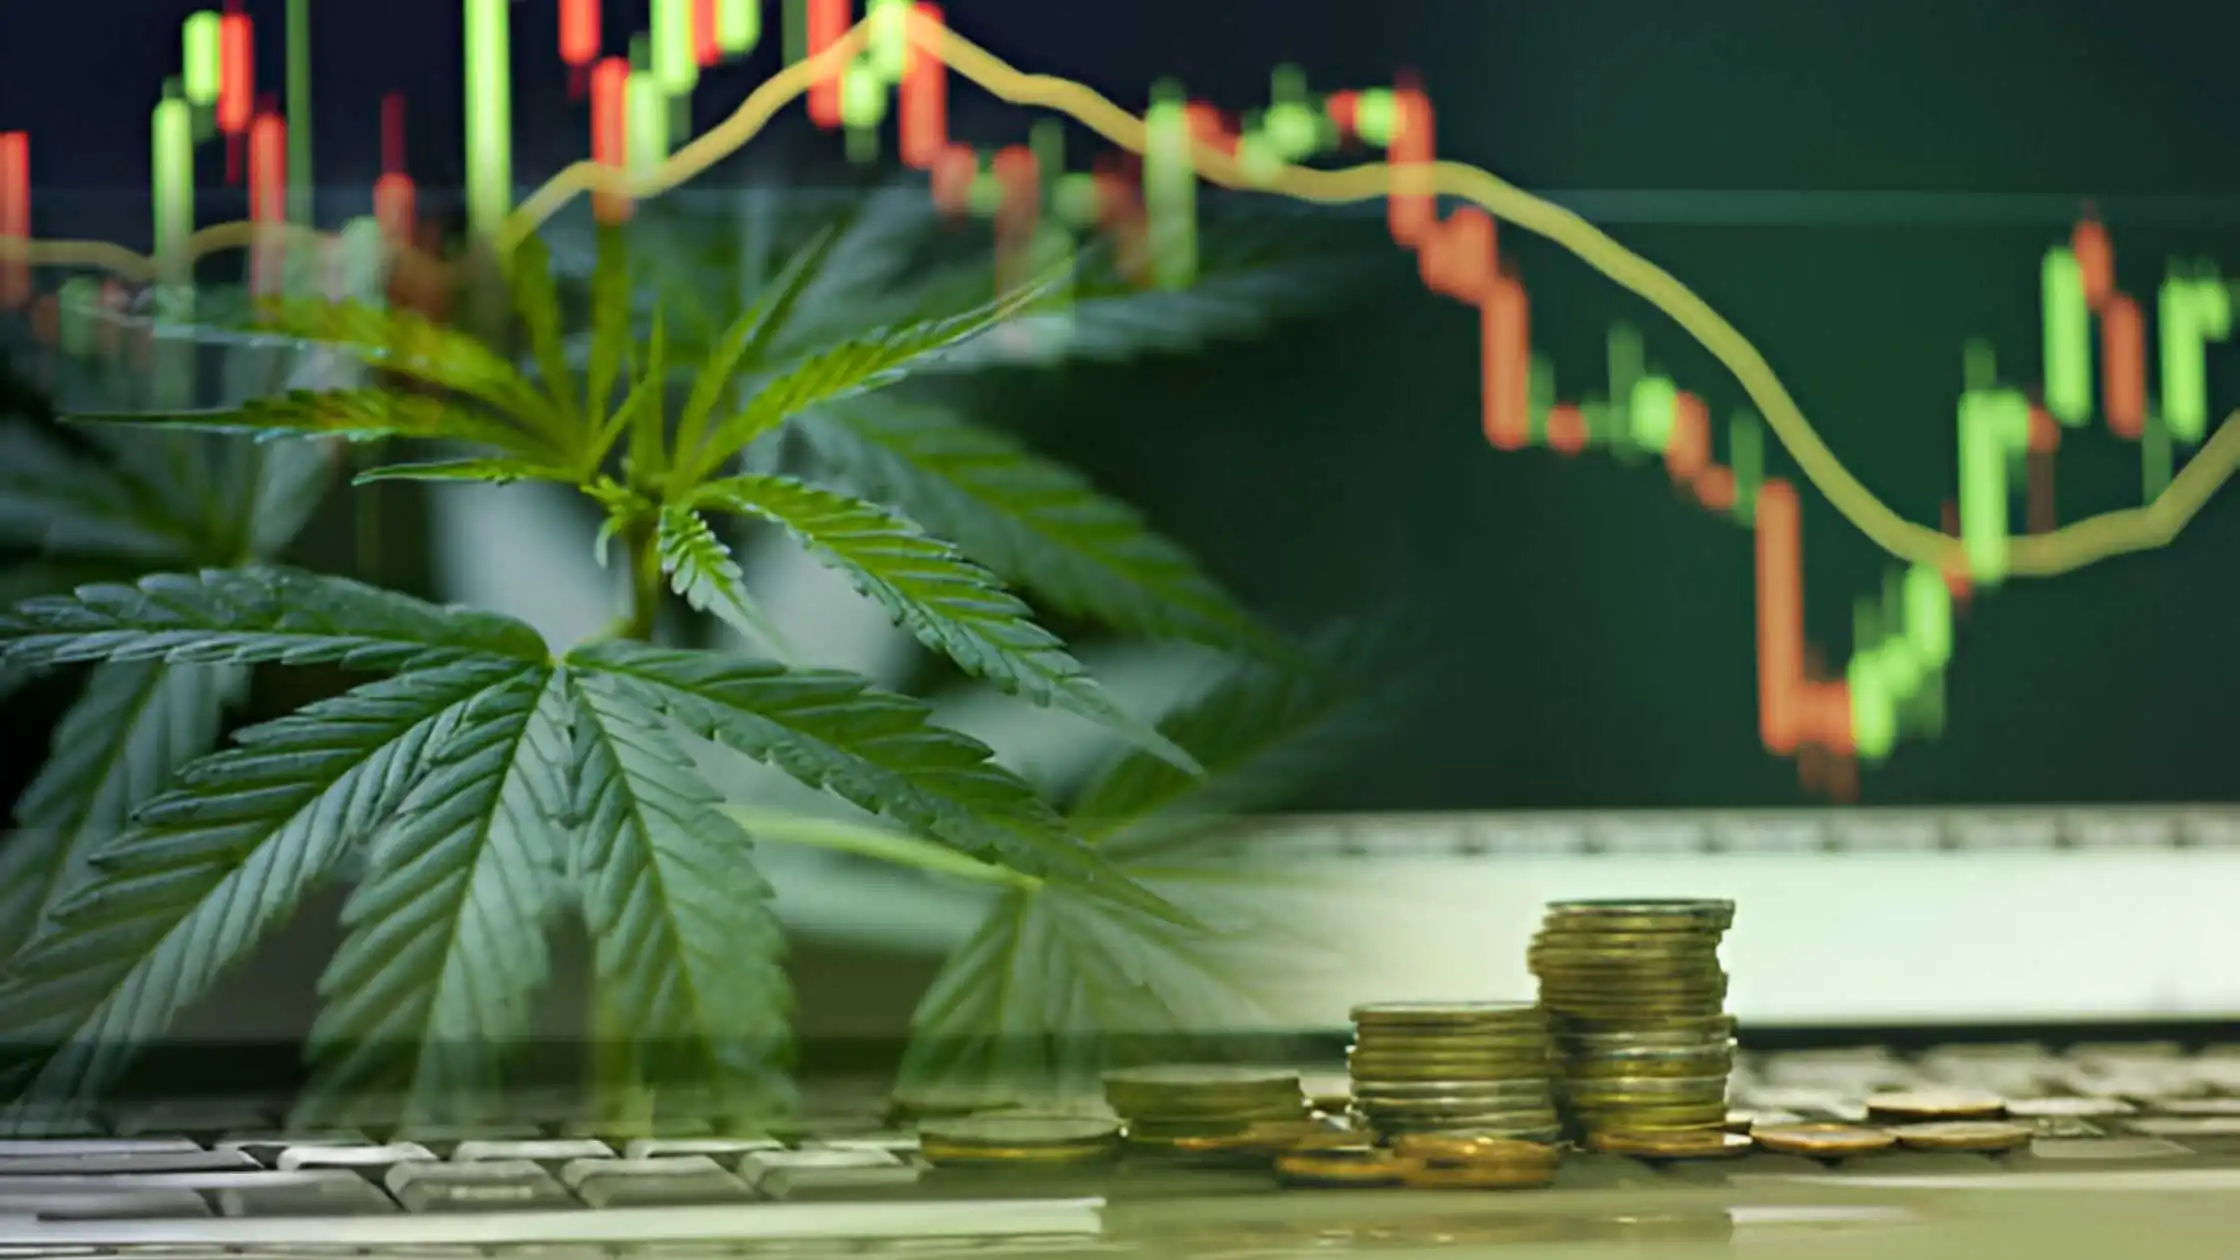 Planning for the Golden Quarter: Holidays a Windfall for Cannabis Businesses